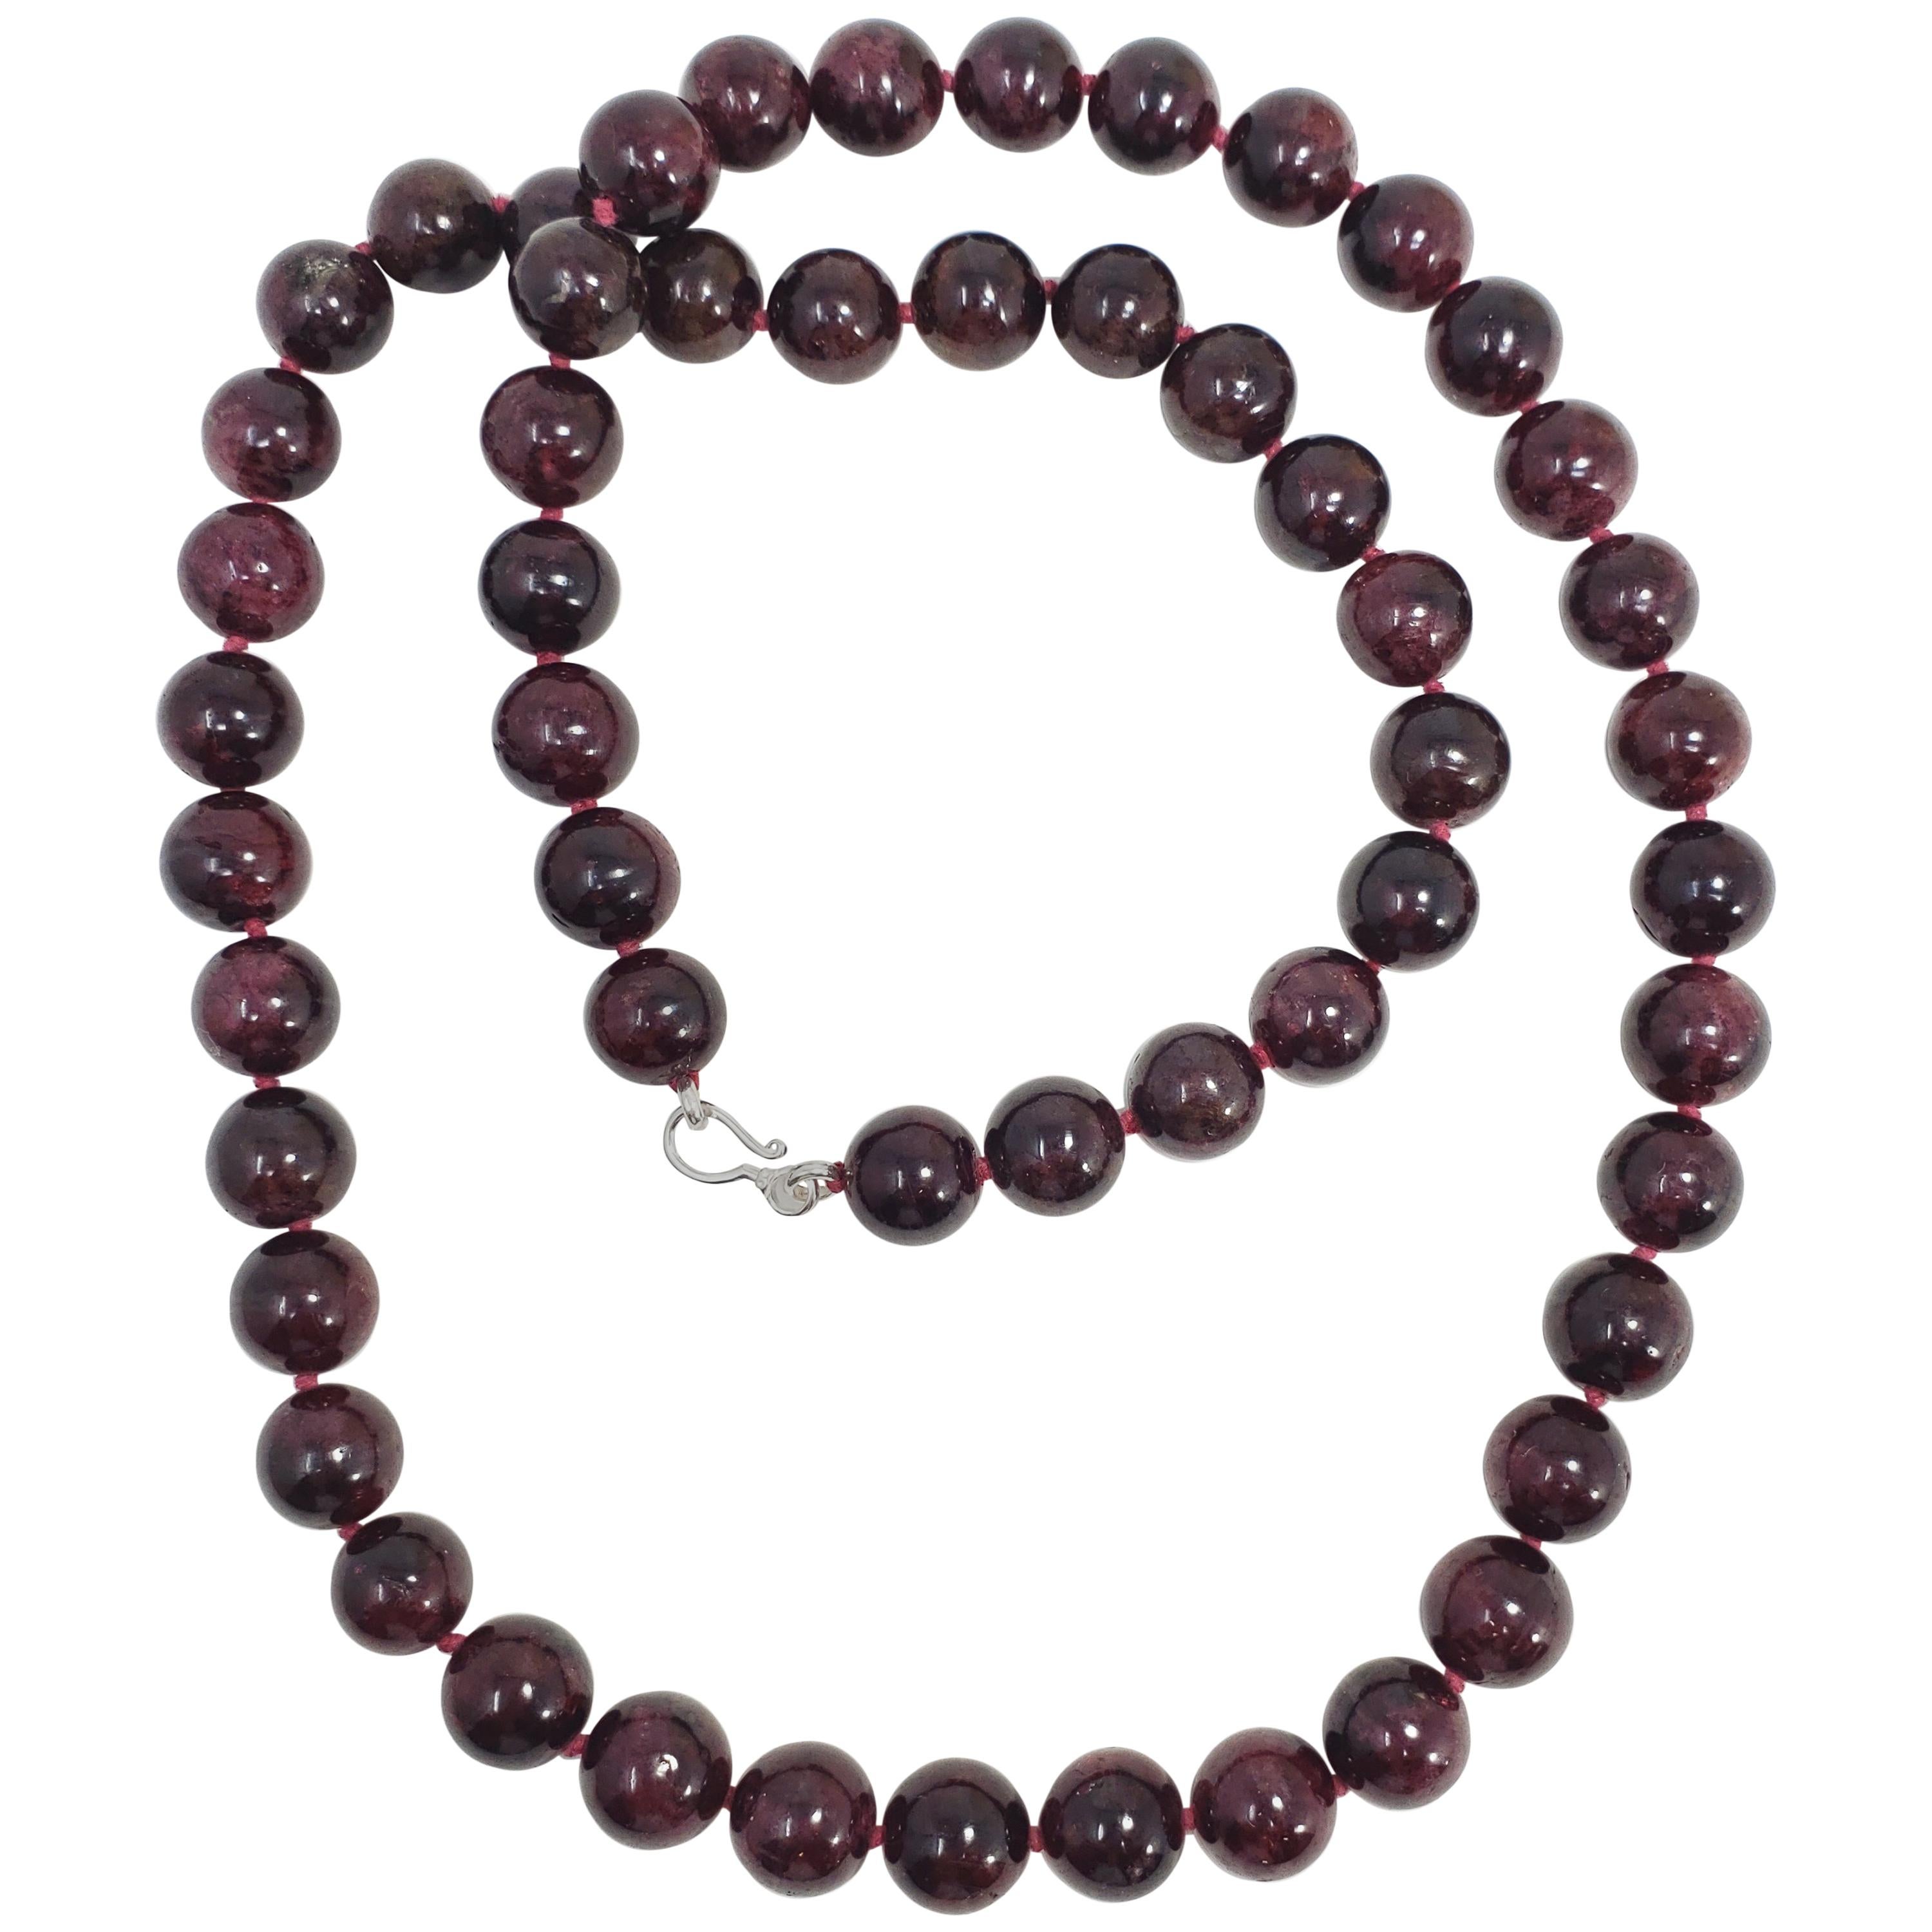 Garnet 12.5mm Bead Knotted String Necklace, Sterling Silver S Hook Clasp For Sale